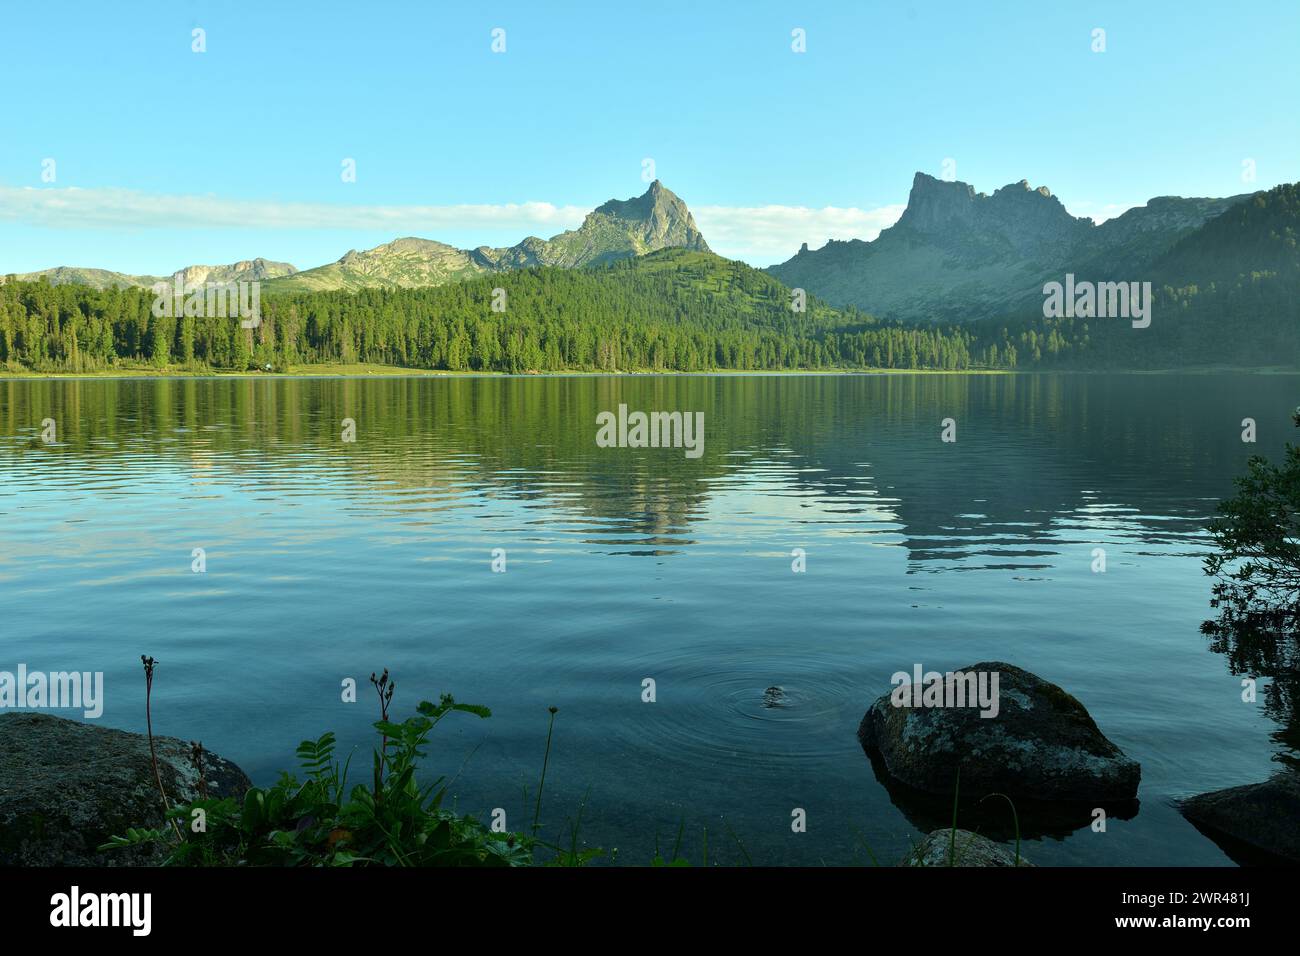 he rocky shore of a large lake in the mountains with a reflection of a dense forest and high rocks in the unsteady surface of the water on a sunny sum Stock Photo